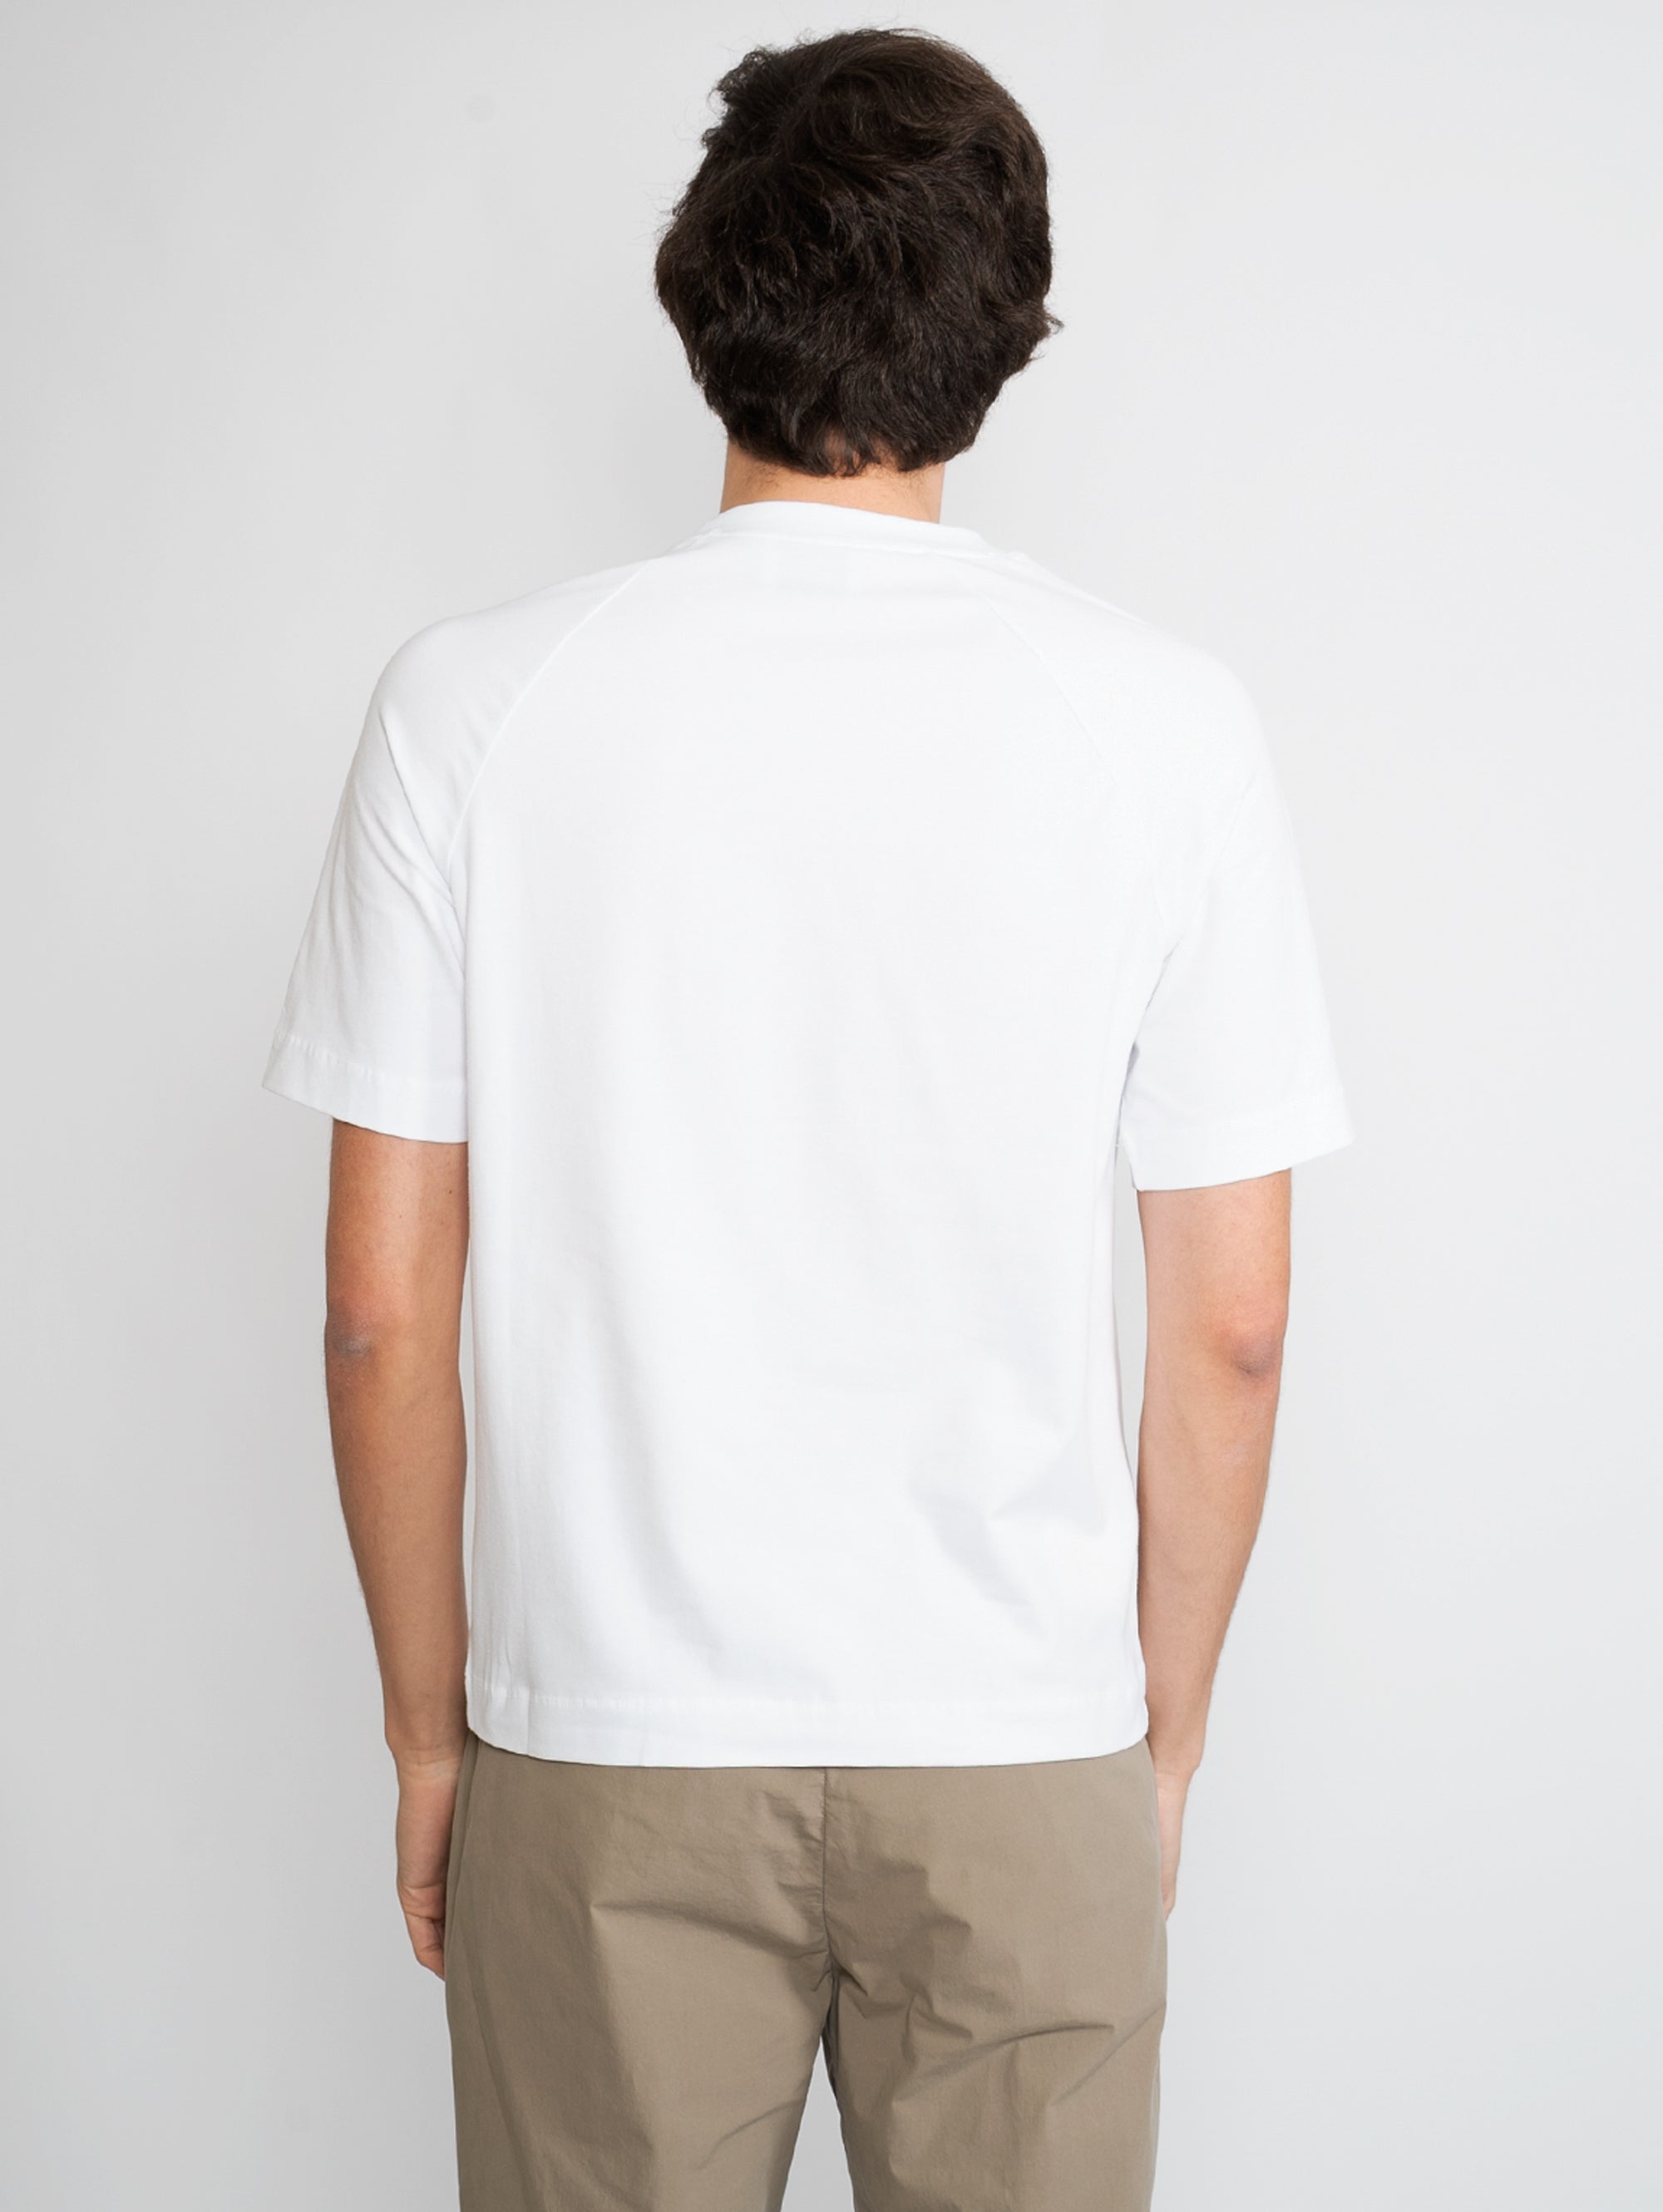 T-shirt with White Pocket